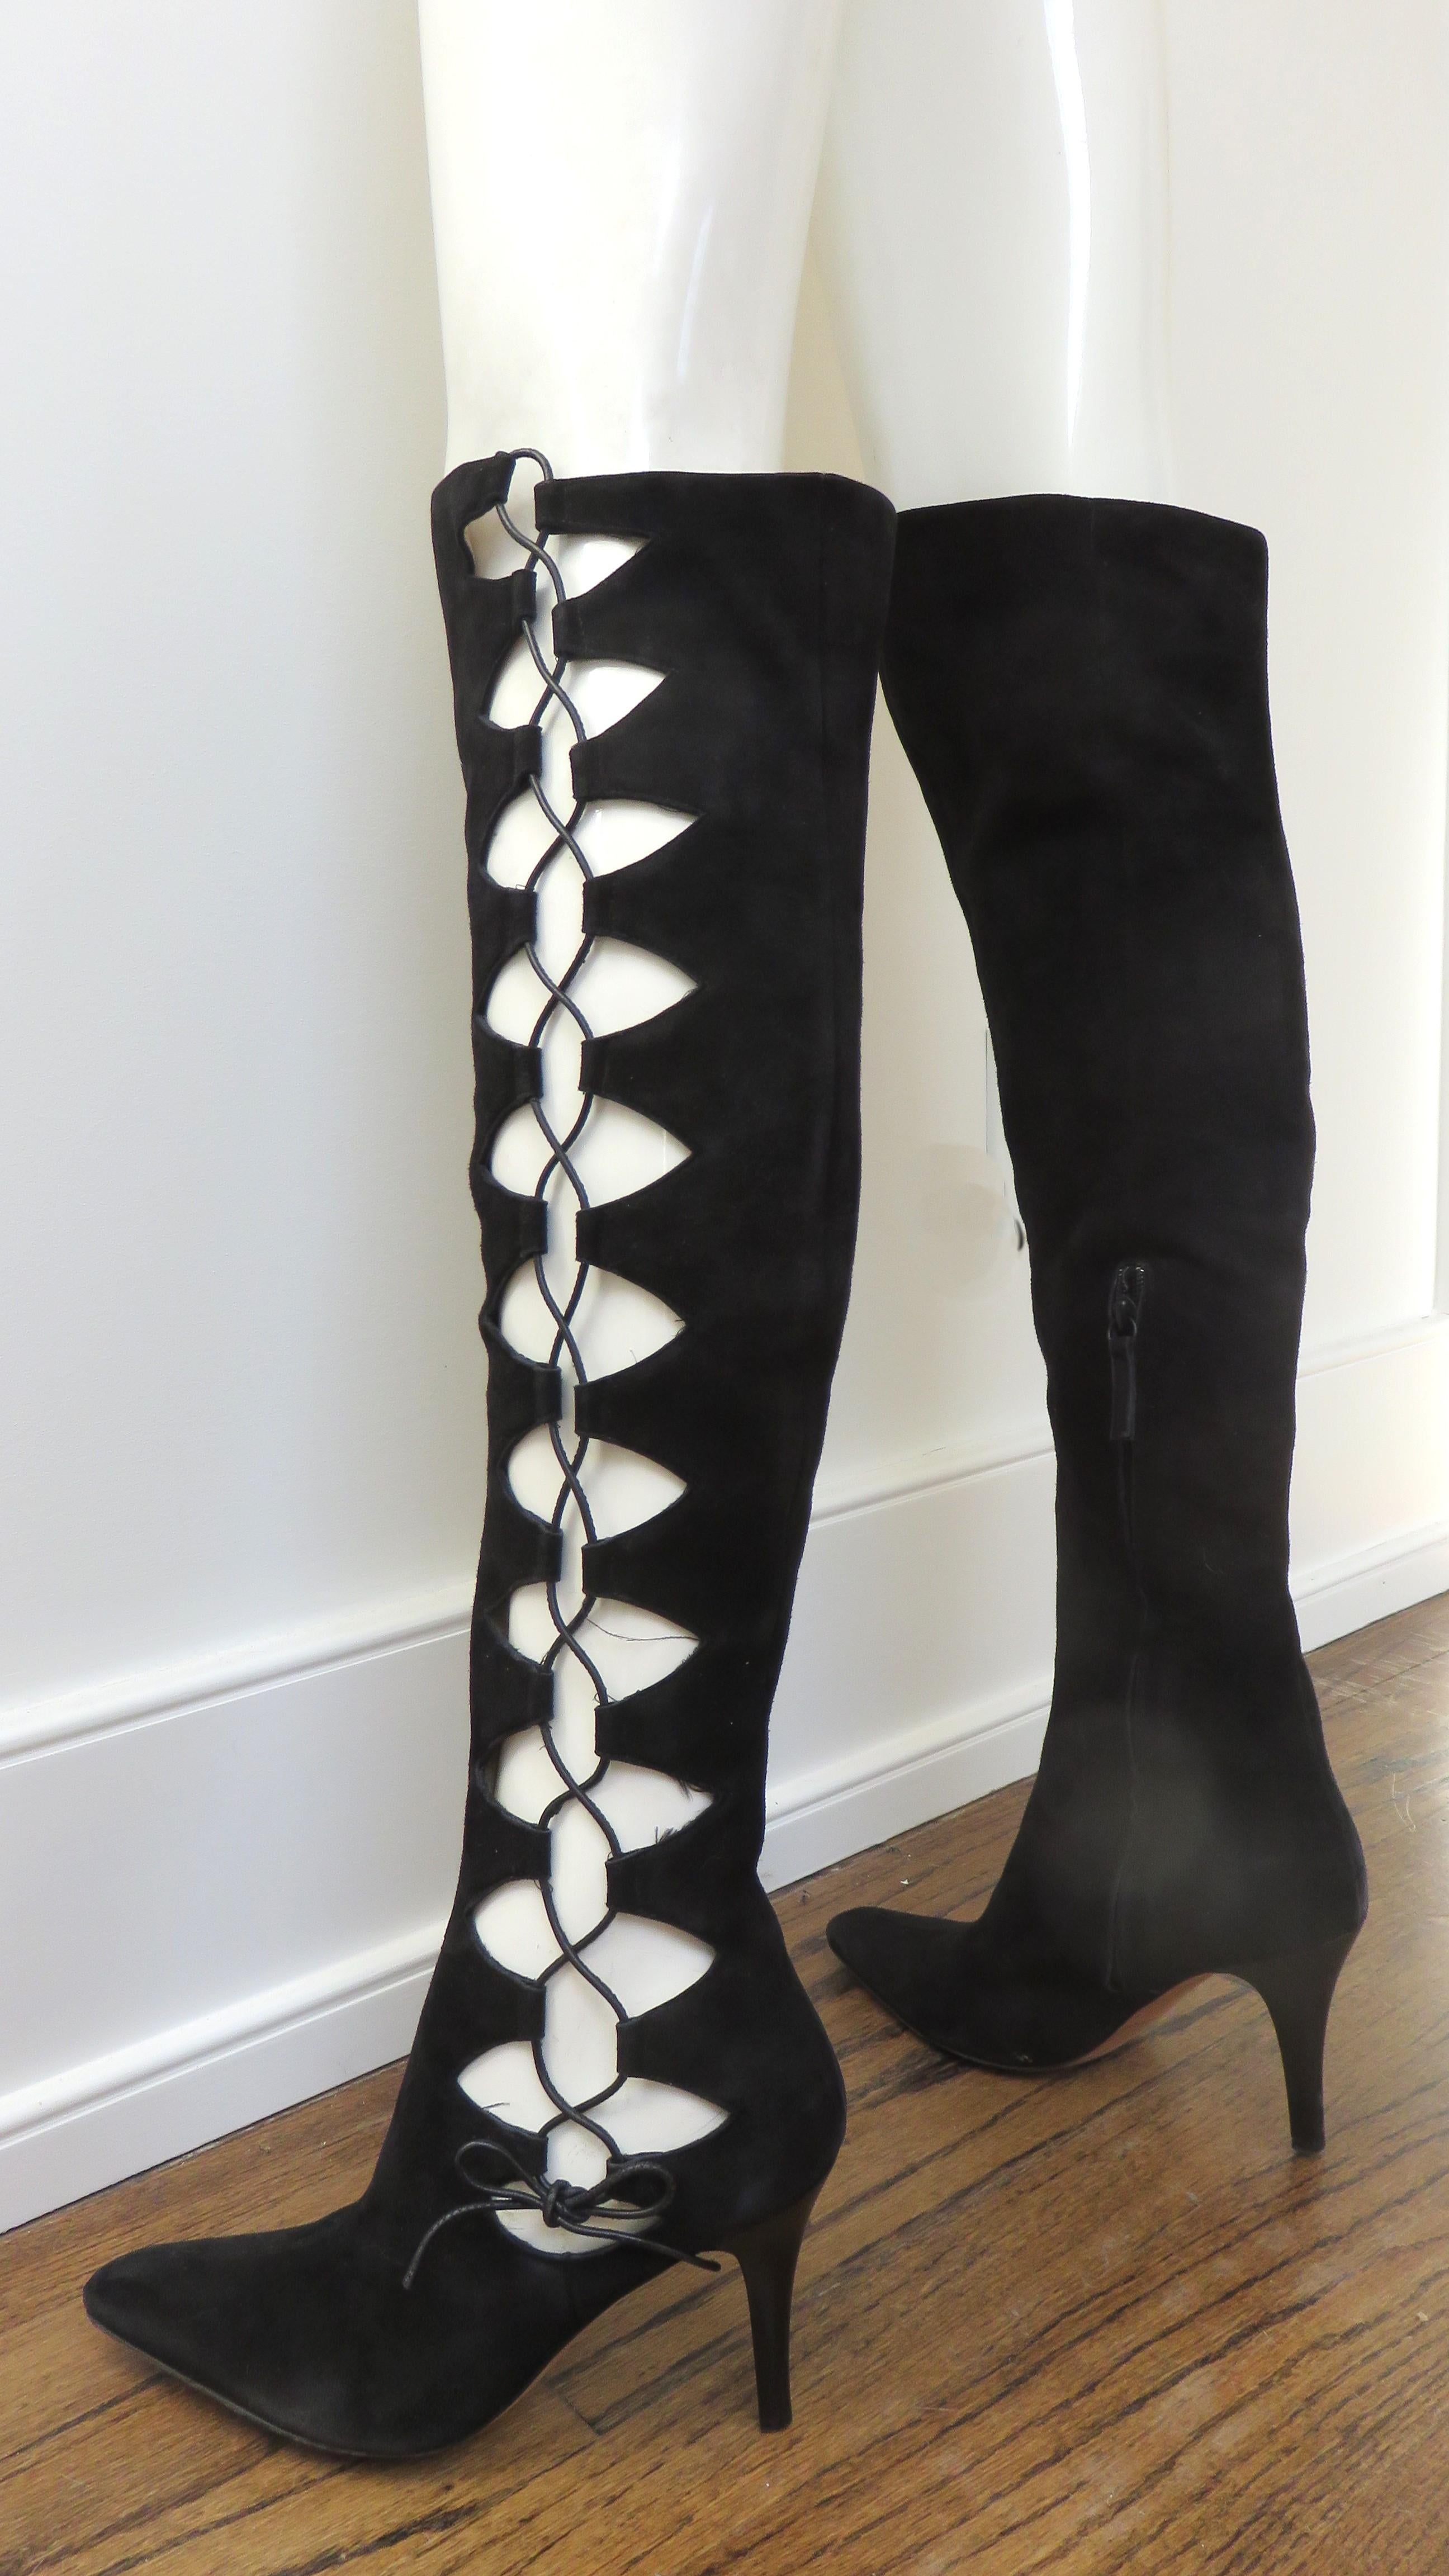 Giuseppe Zanotti Black Suede Lace up Cutout Thigh High Boots Size 9 For Sale 4